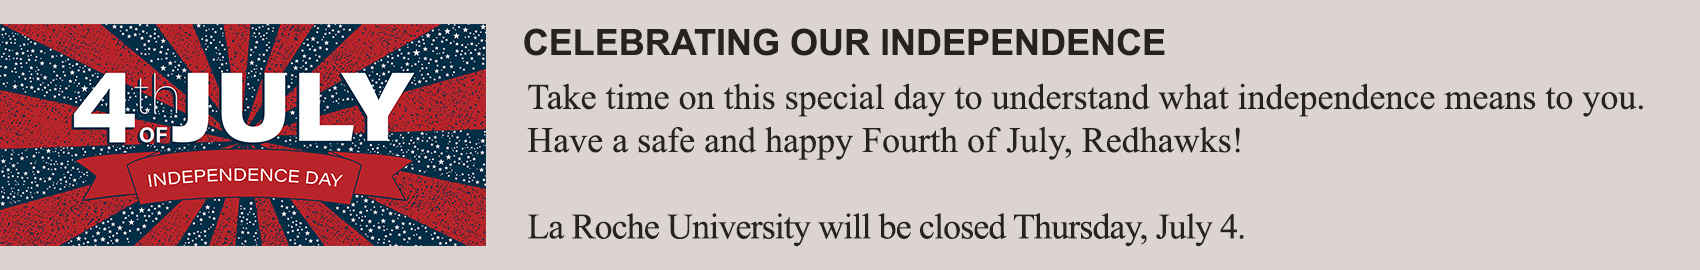 Celebrating our independence. Take time on this special day to understand what independence means to you.  Have a safe and happy Fourth of July, Redhawks! La Roche University will be closed Thursday, 